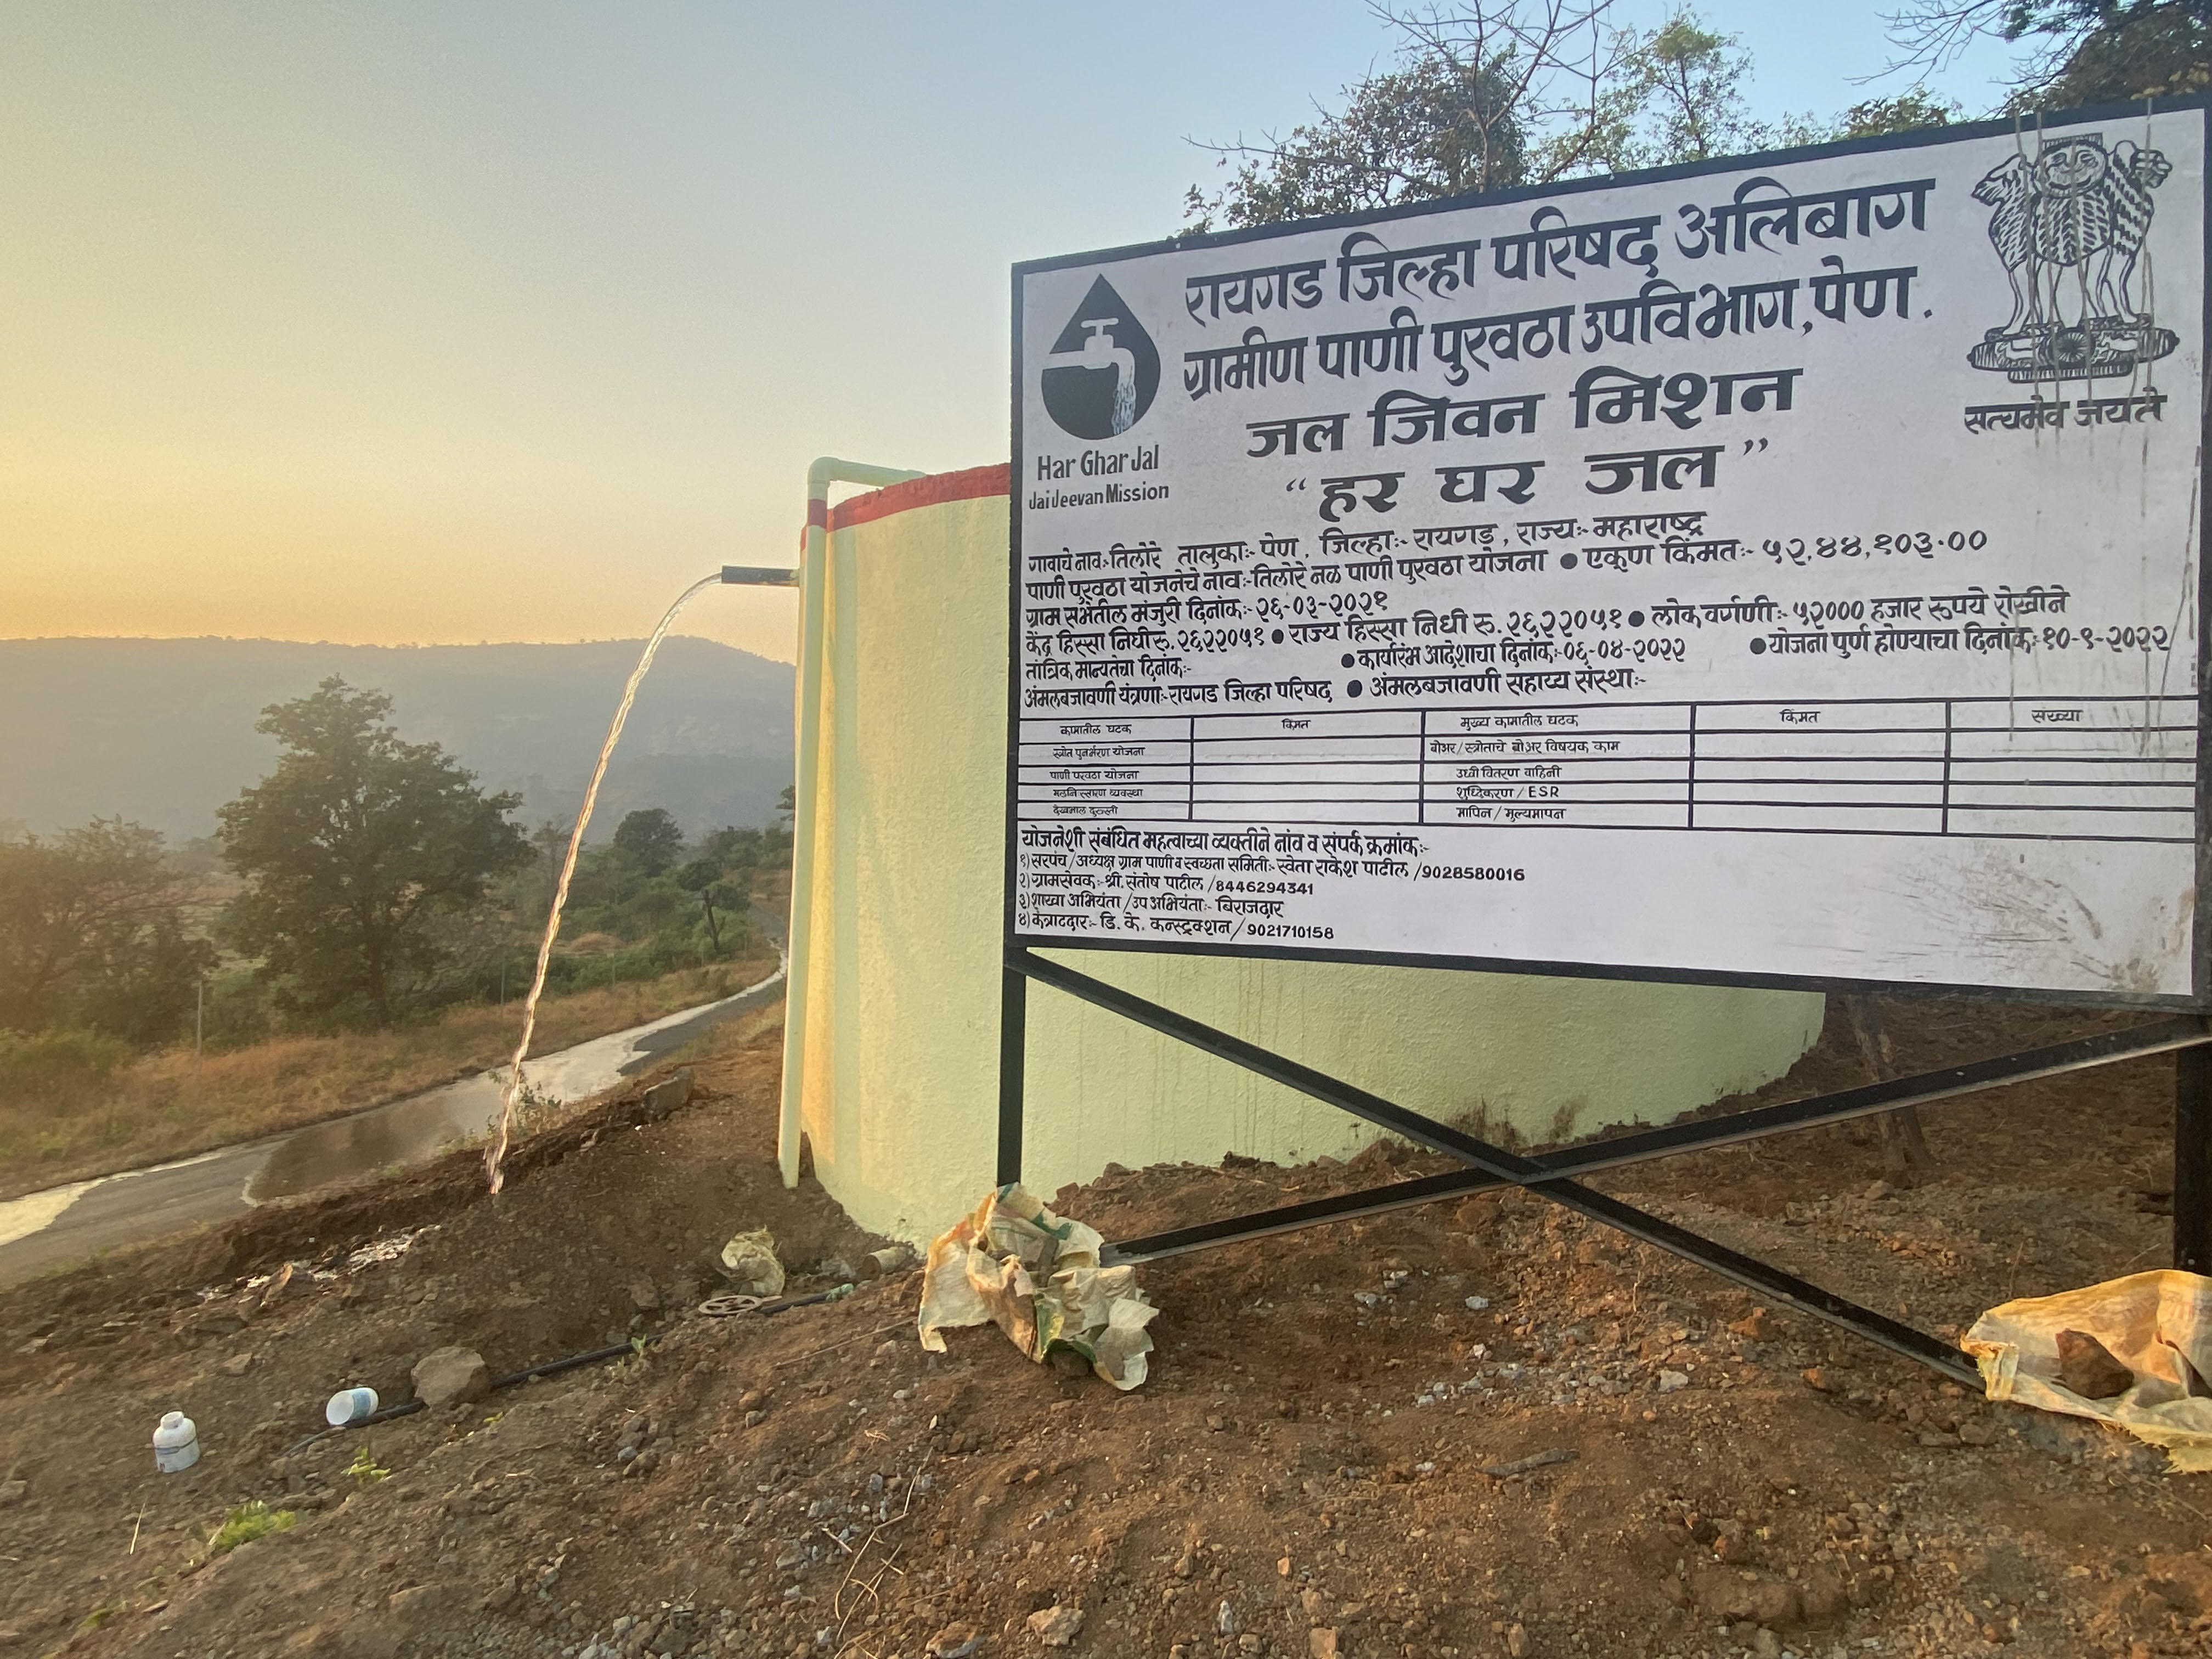 A new water tank showcasing the Jal Jeevan Mission board after completion